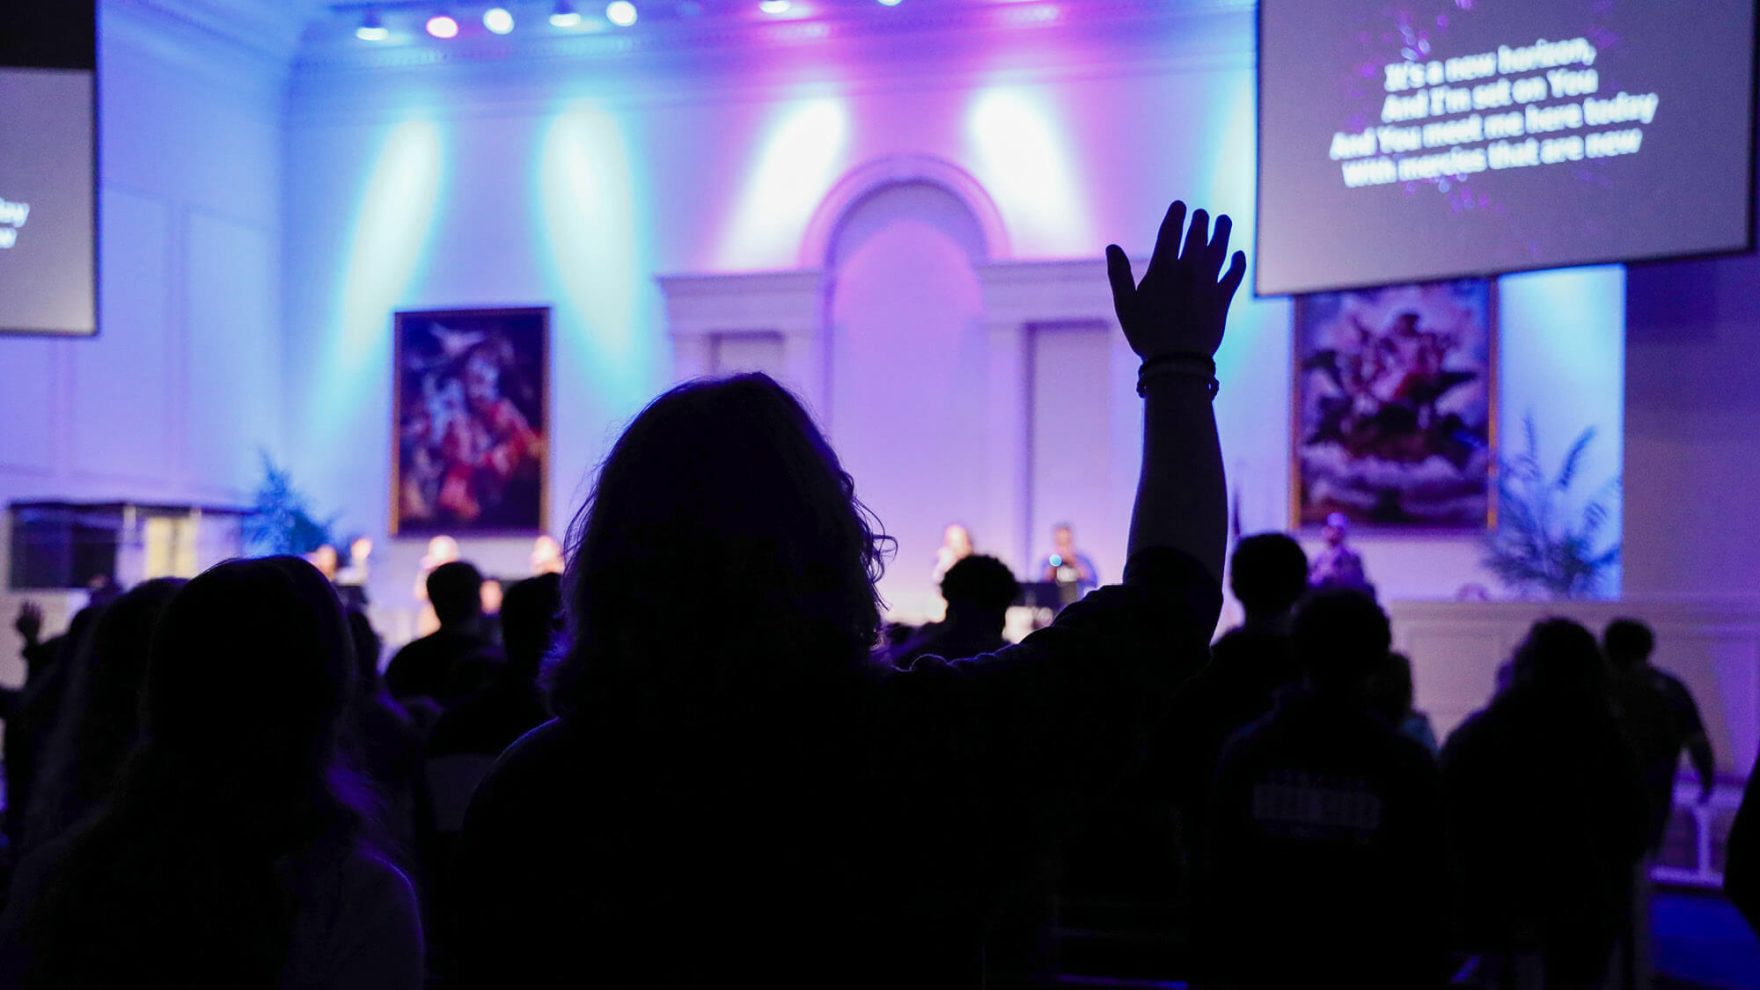 A worship service at Regent University: Learn about its worship leader training programs.